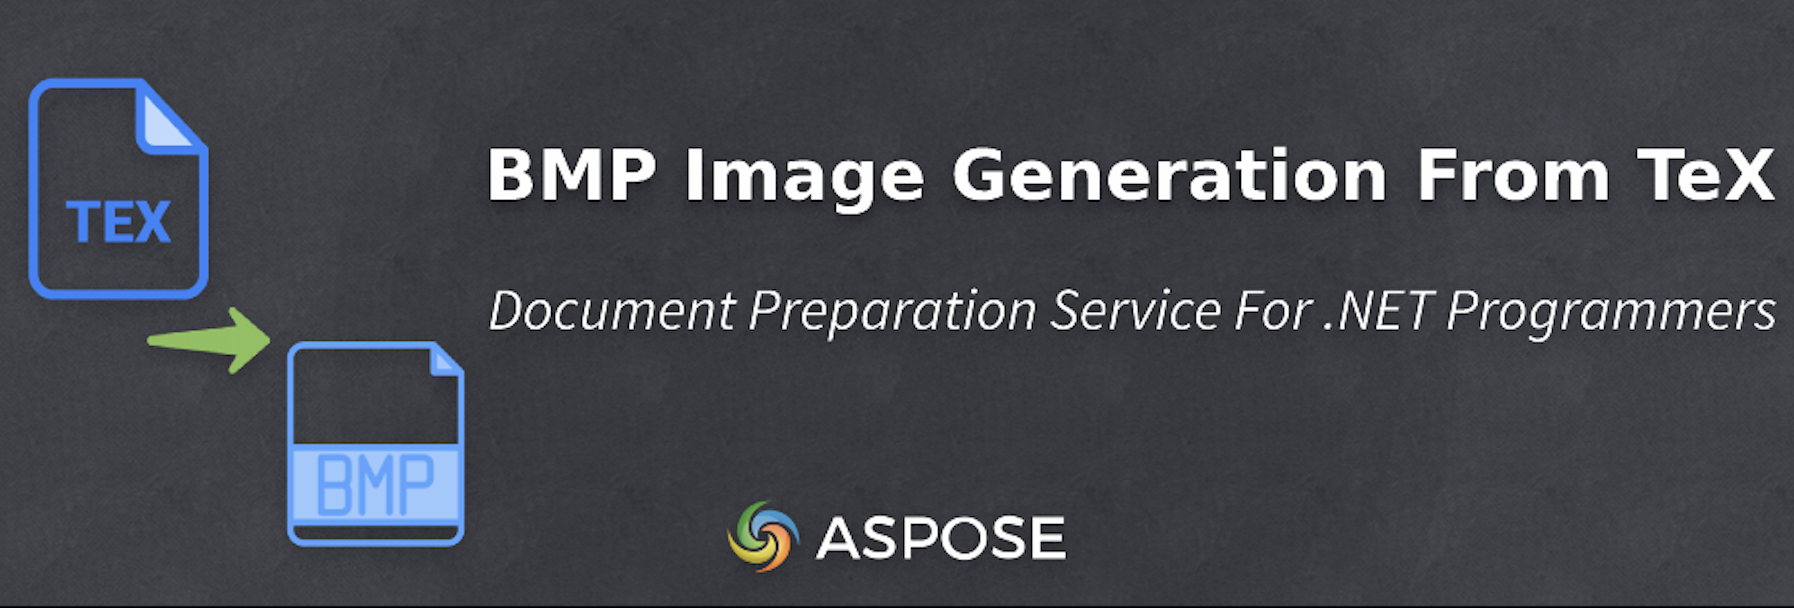 BMP Image Generation From TeX in C# - TeX to Image